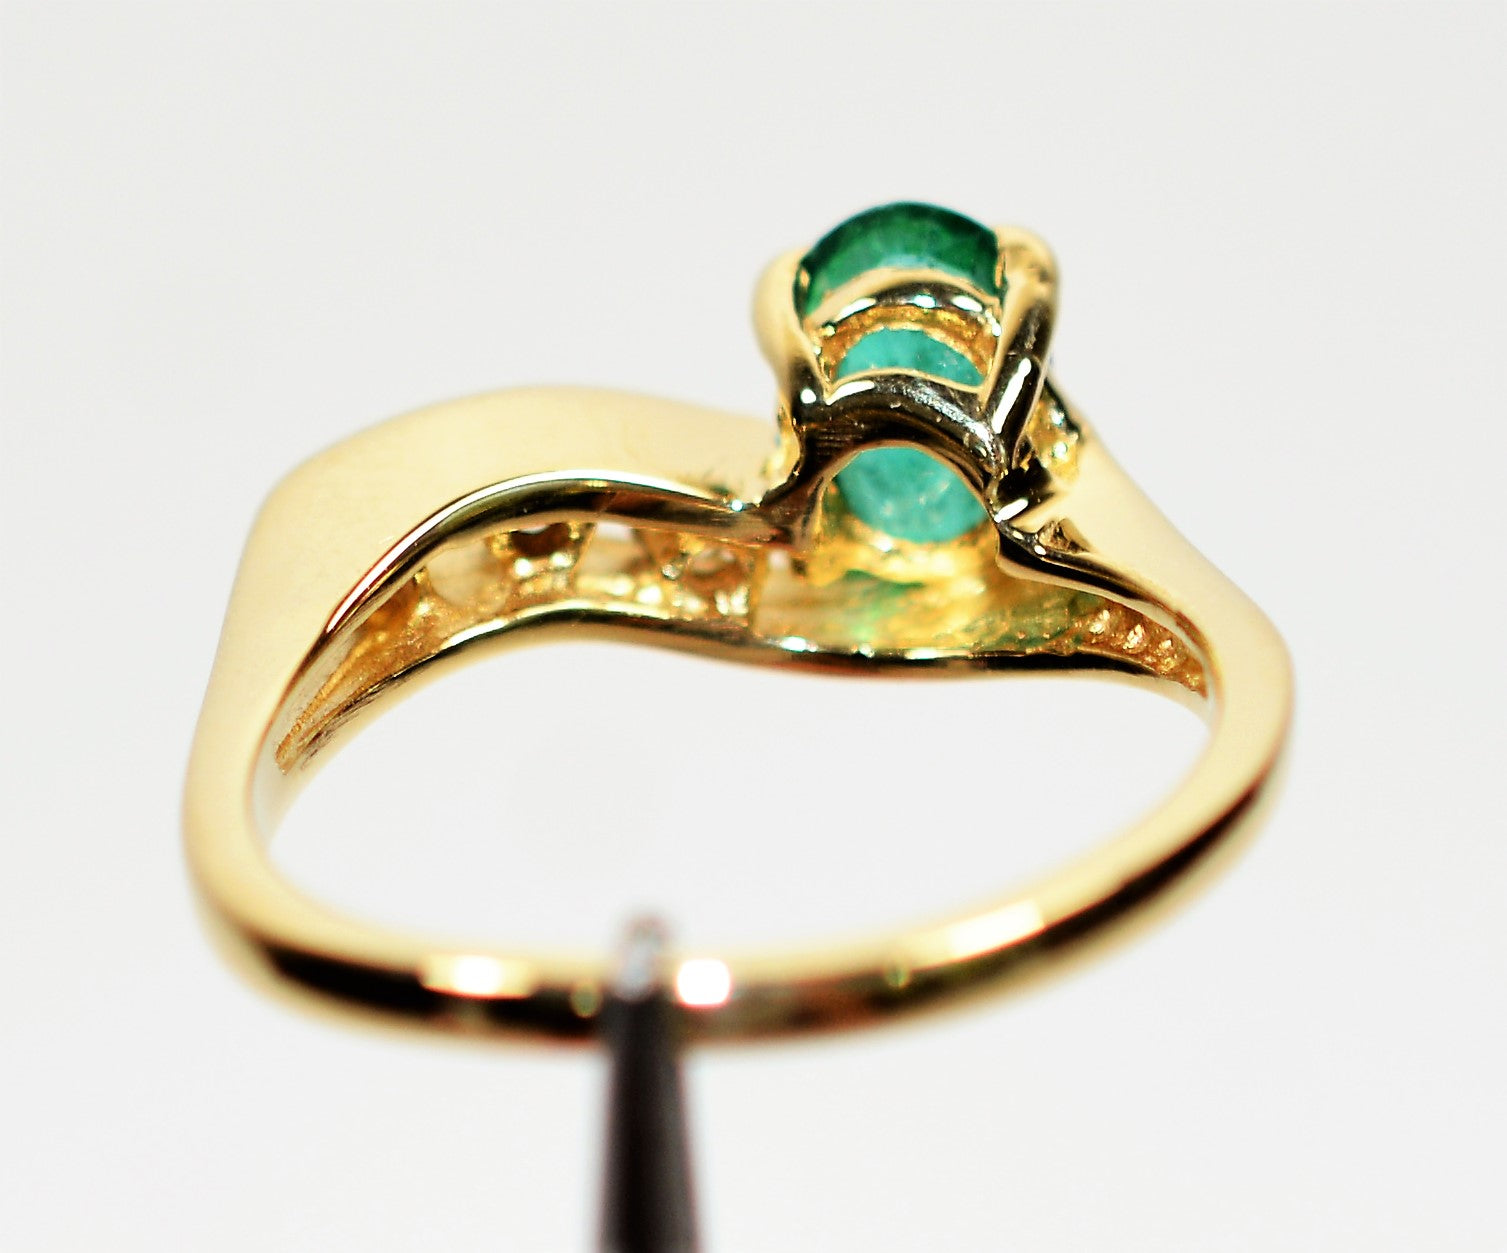 Natural Colombian Emerald & Diamond Ring 14K Solid Gold 1tcw Gemstone Ring Statement Ring May Birthstone Ring Vintage Ring Women's Ring Fine